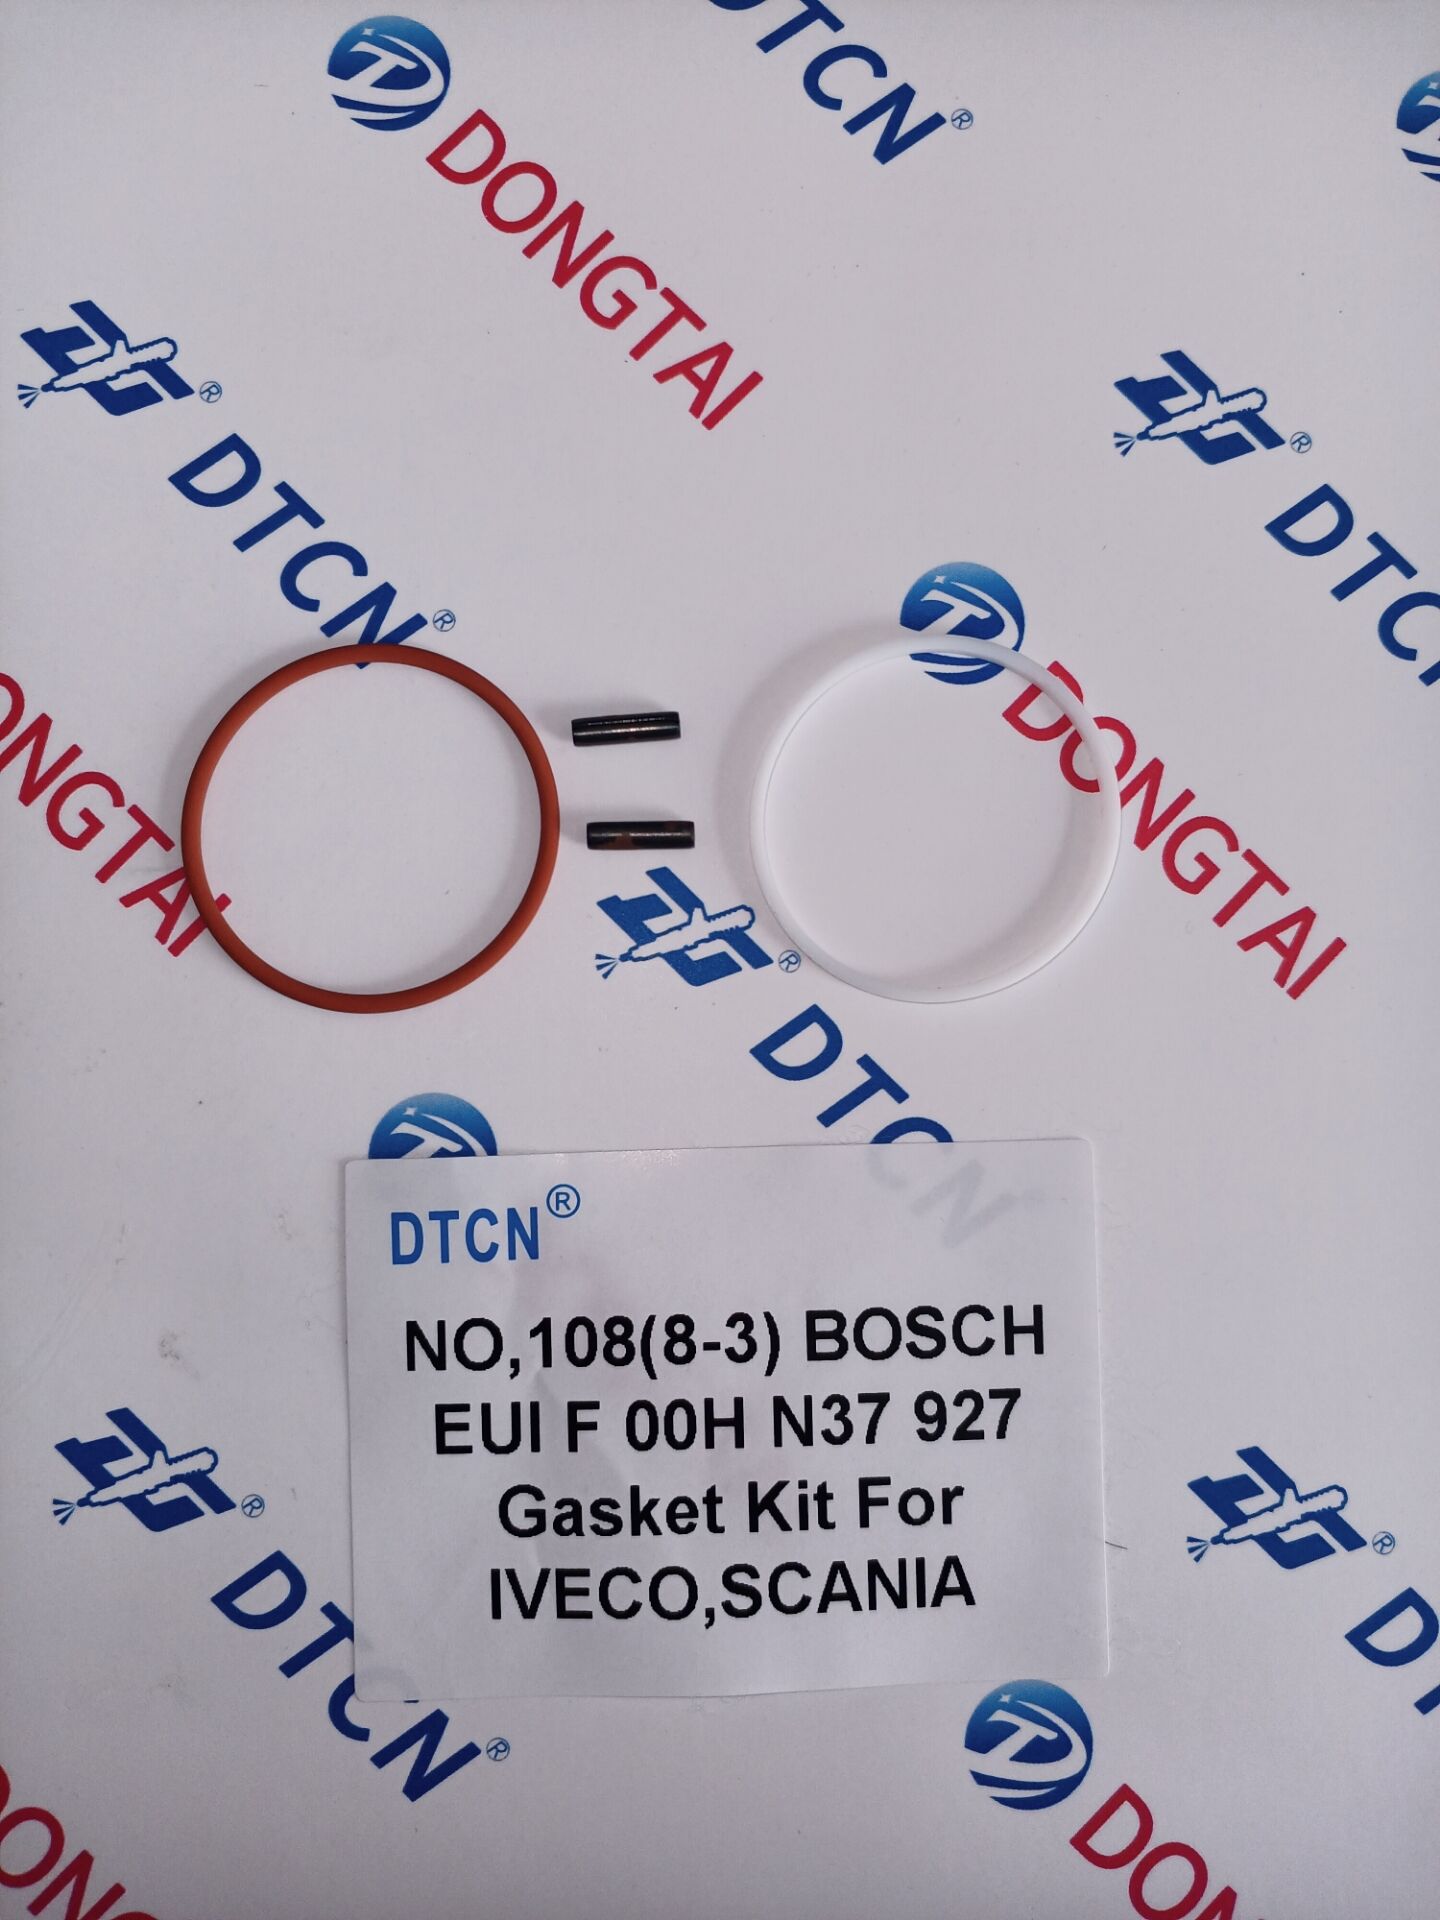 NO.108(8-3) BOSCH EUI F 00H N37 927 Gasket Kit For IVECO,SCANIA